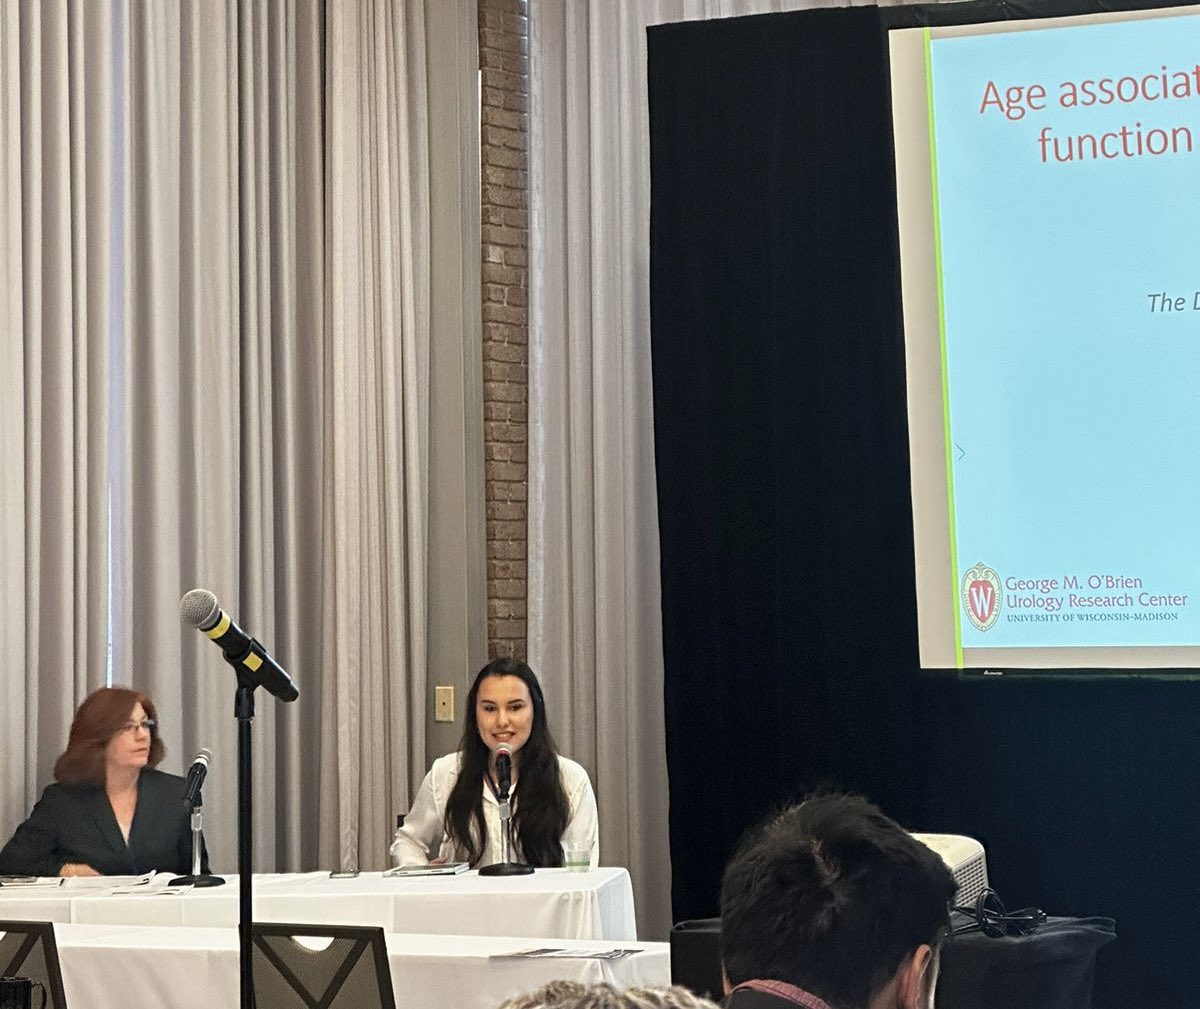 Our team had a busy day today and it started with @_cintiavs moderating the first session of the day with the keynote speaker William Ricke’s lecture on BPH and aging #PelvRes23 Great job, Cintia!